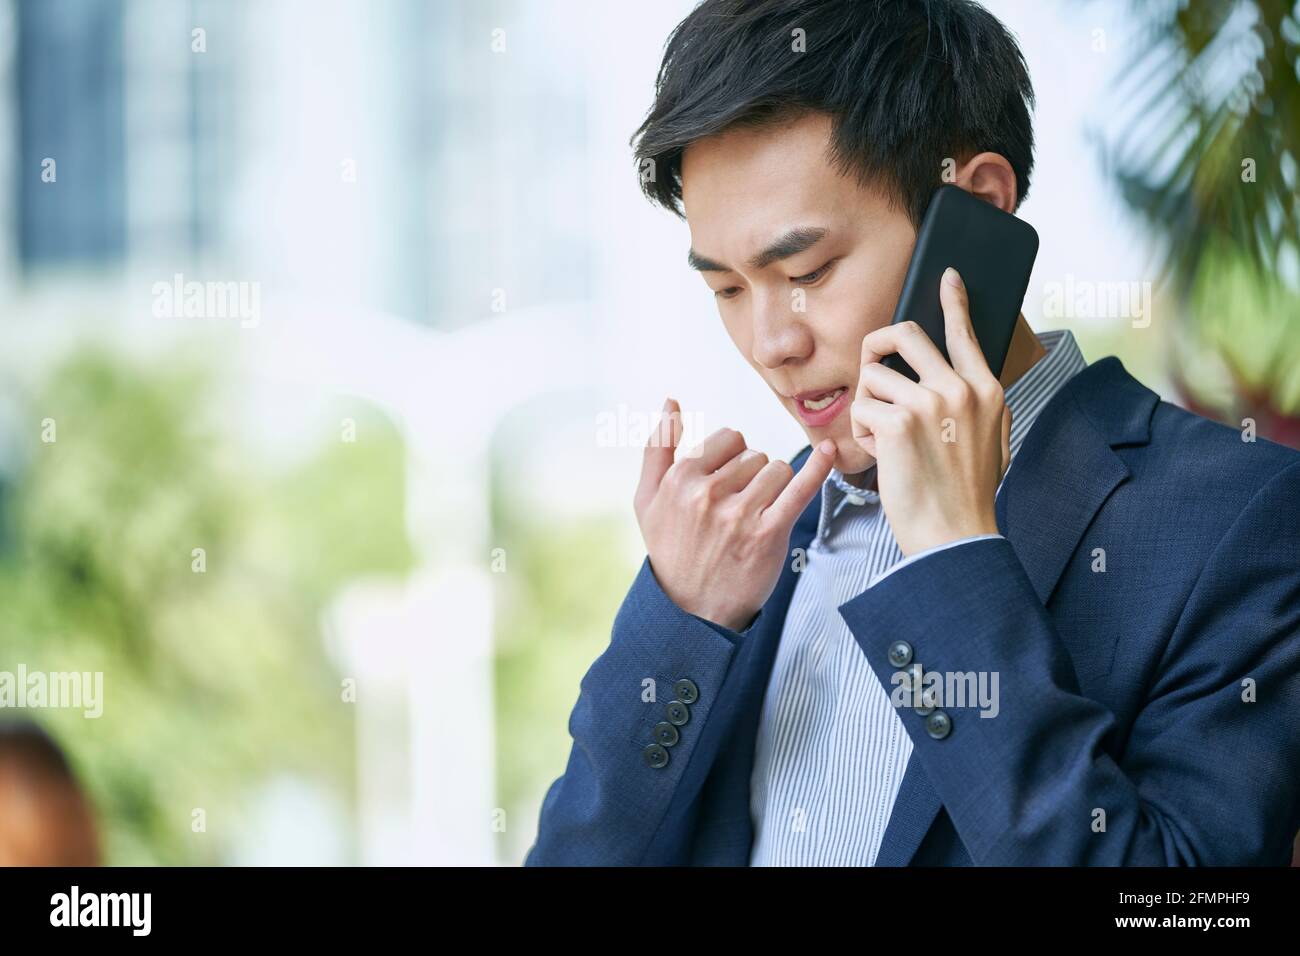 young asian businessman talking on cellphone outdoors Stock Photo